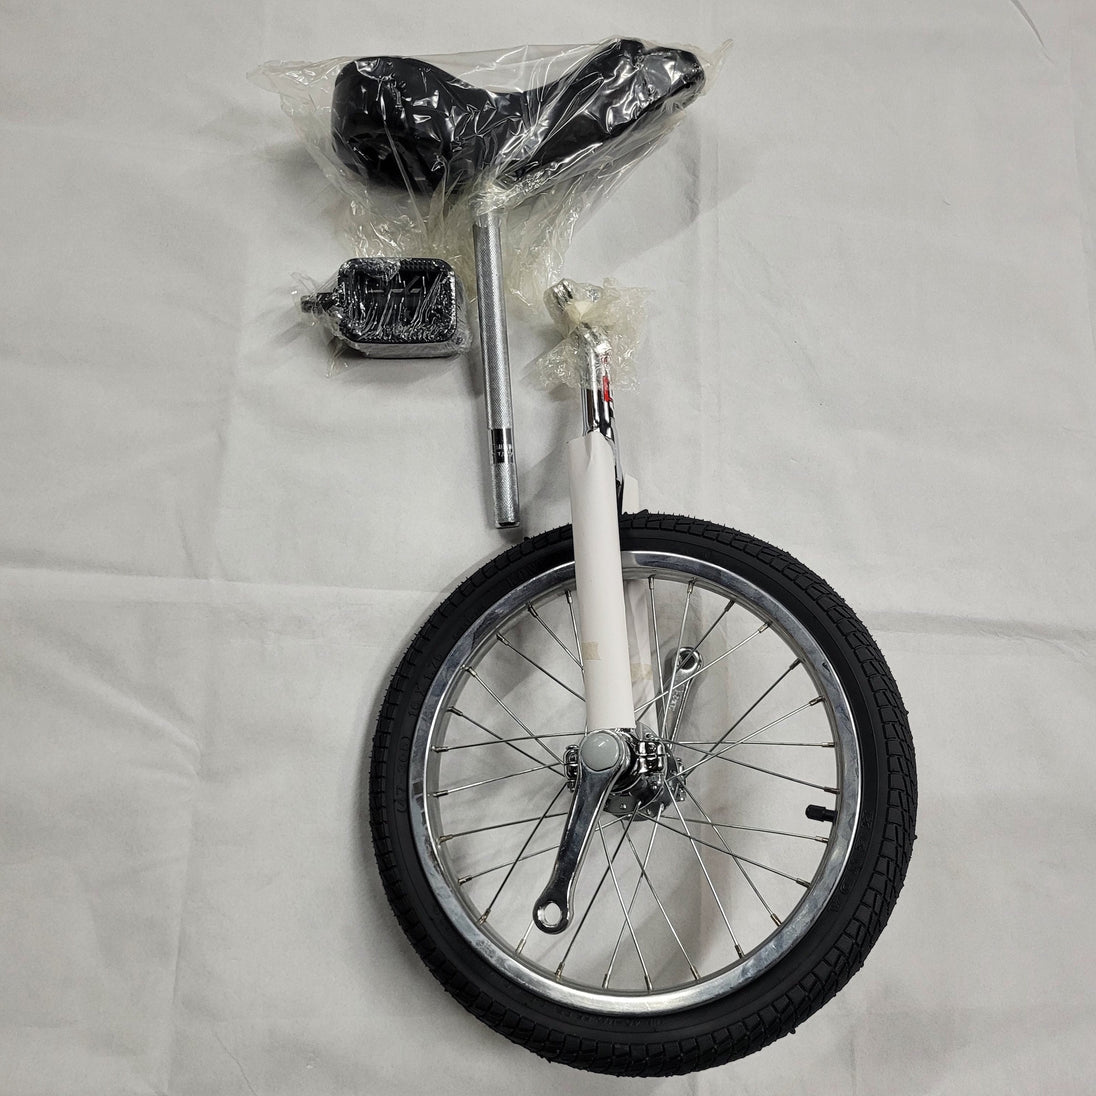 Deluxe Indy Trainer 16" Unicycle - Bargain Basement